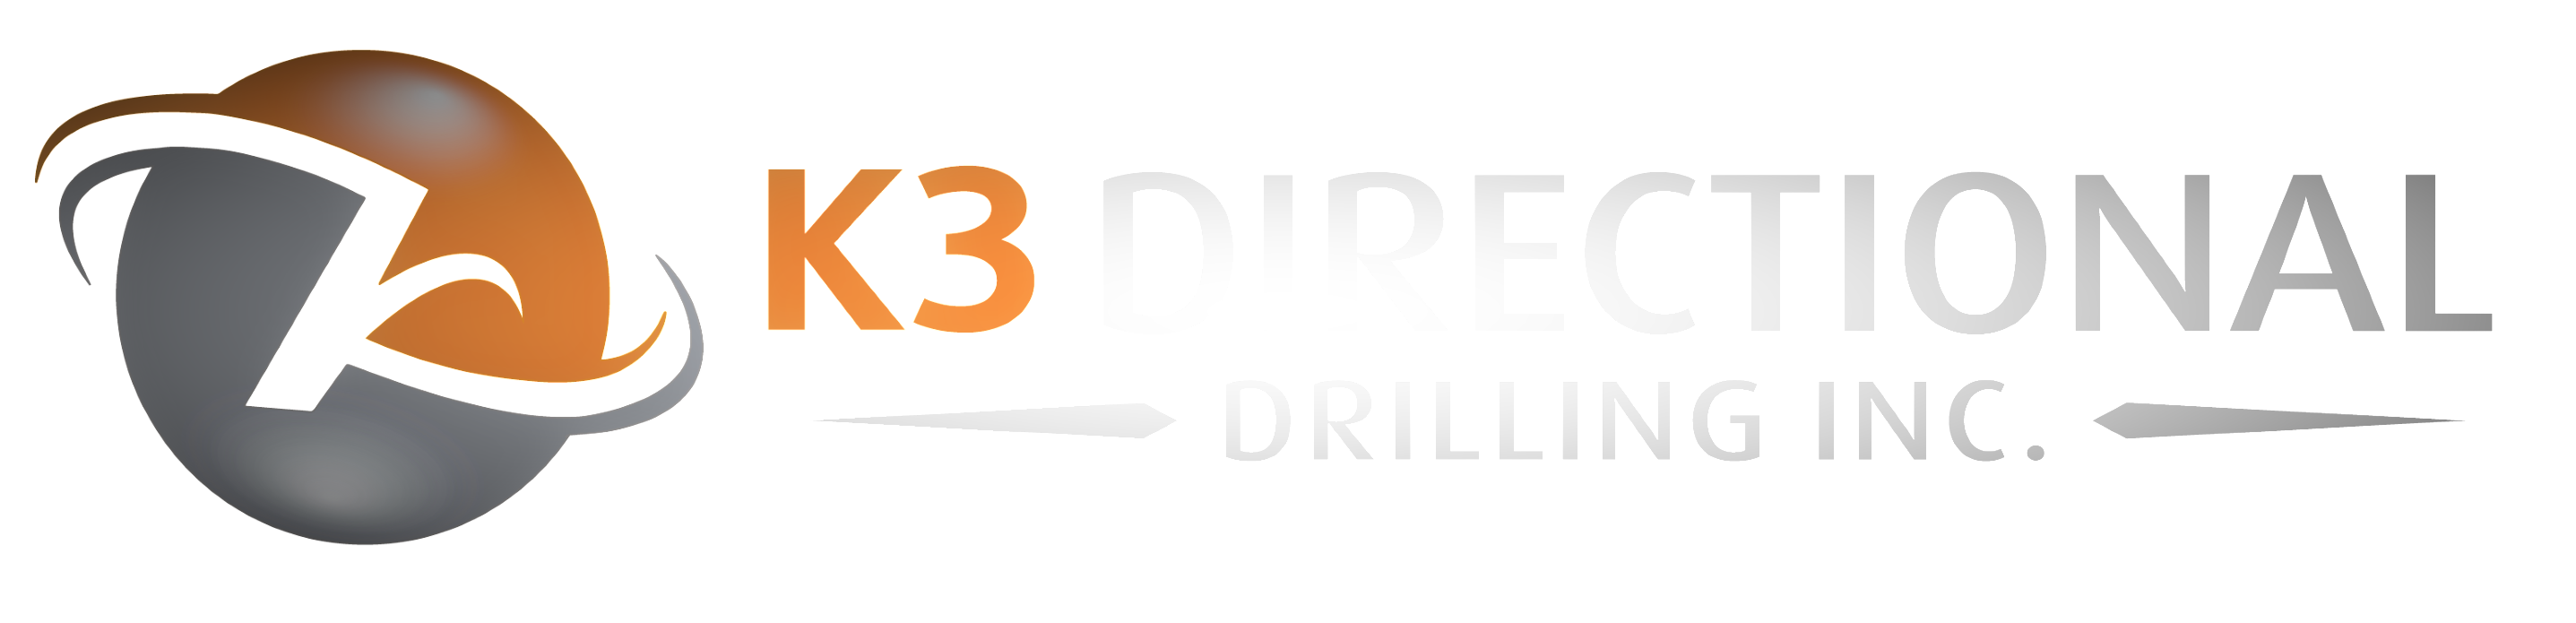 k3 directional drilling